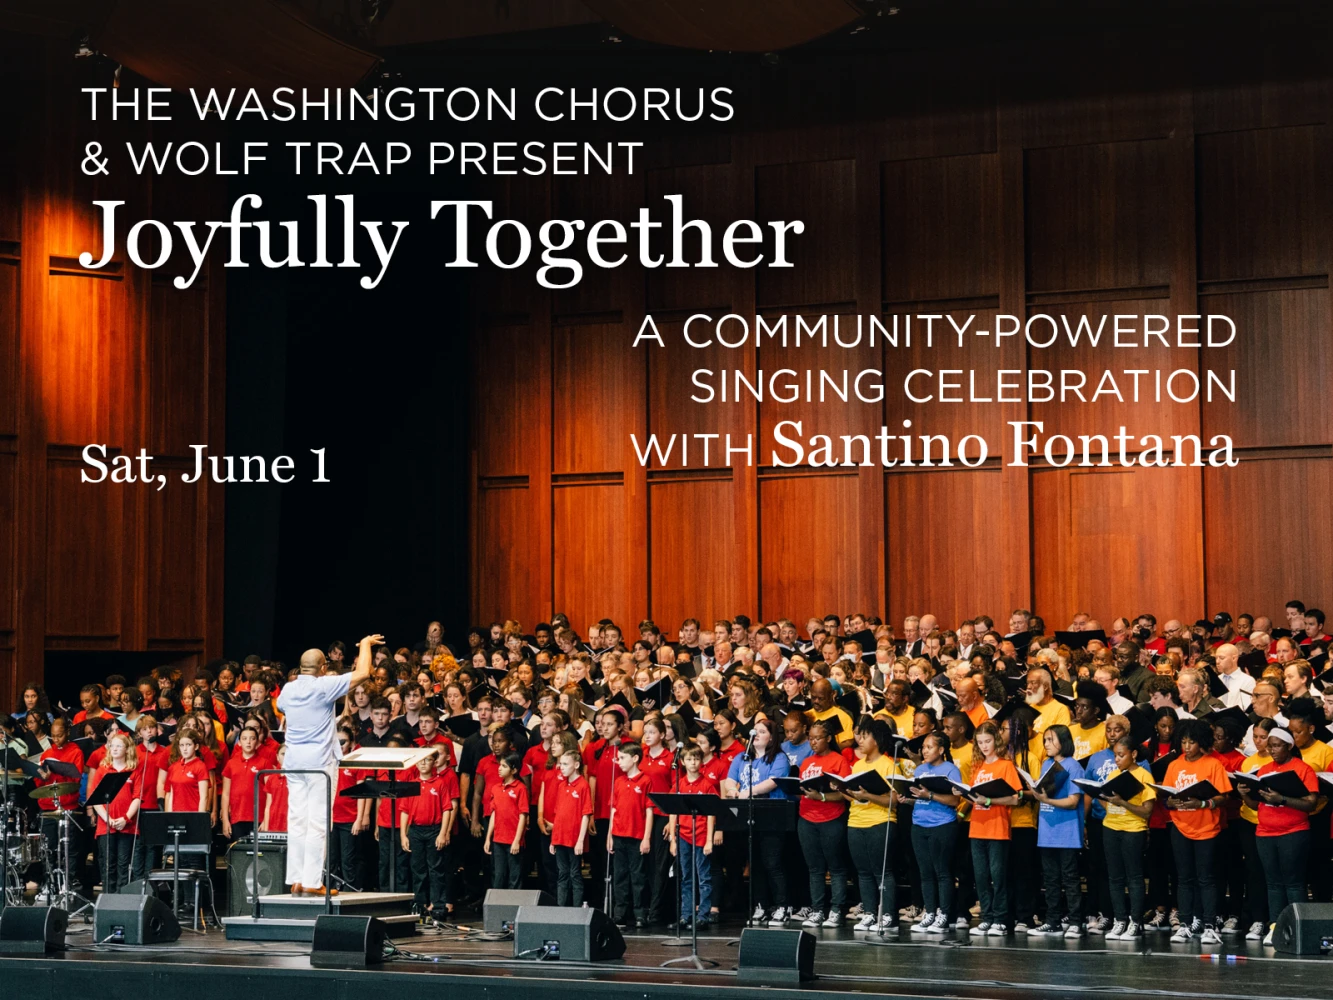 Joyfully Together: A Community-Powered Singing Celebration with Santino Fontana: What to expect - 2